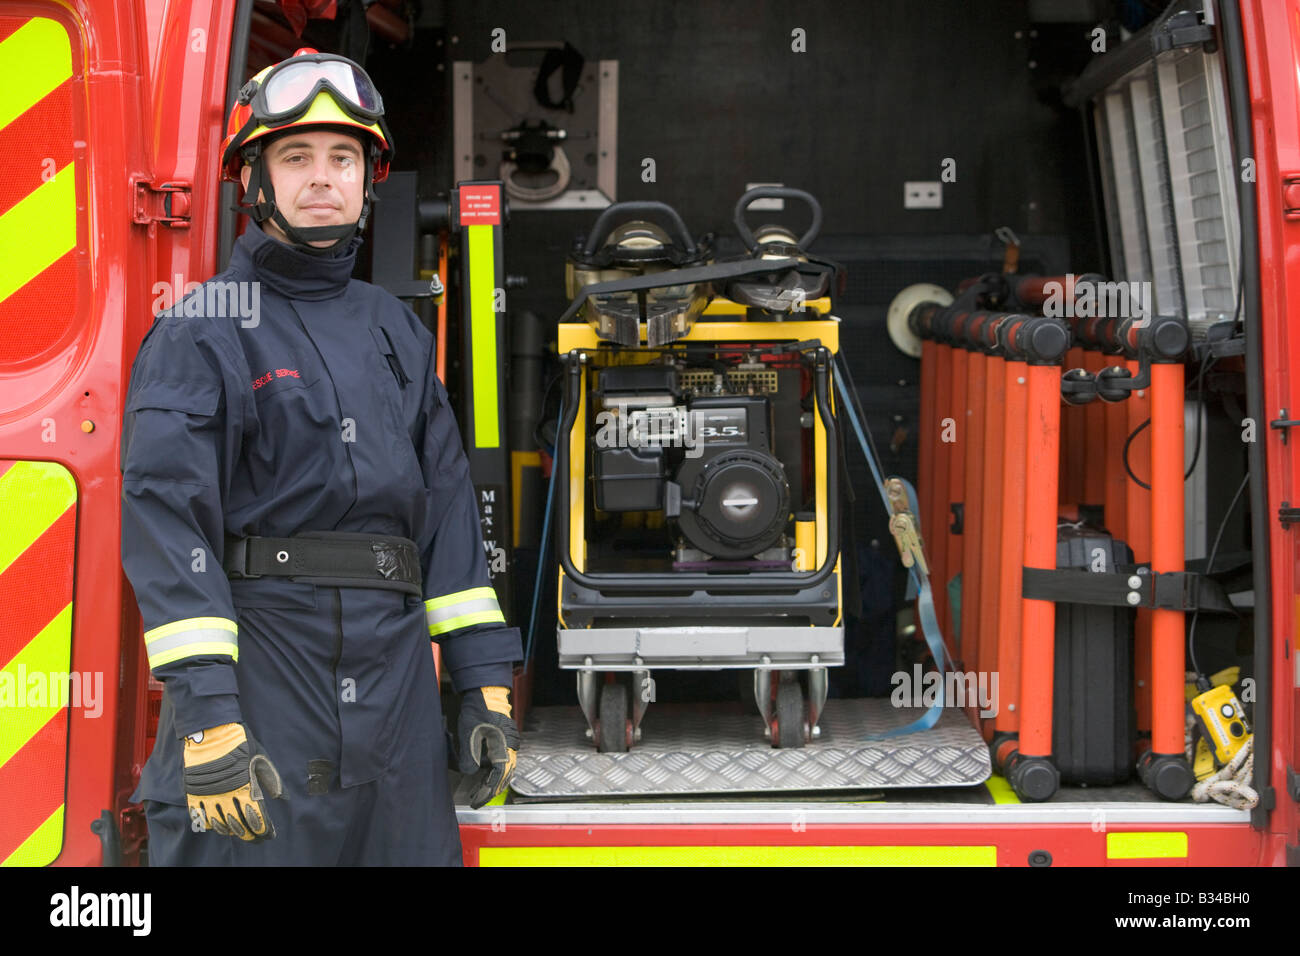 Rescue worker standing by open back door of rescue vehicle Stock Photo